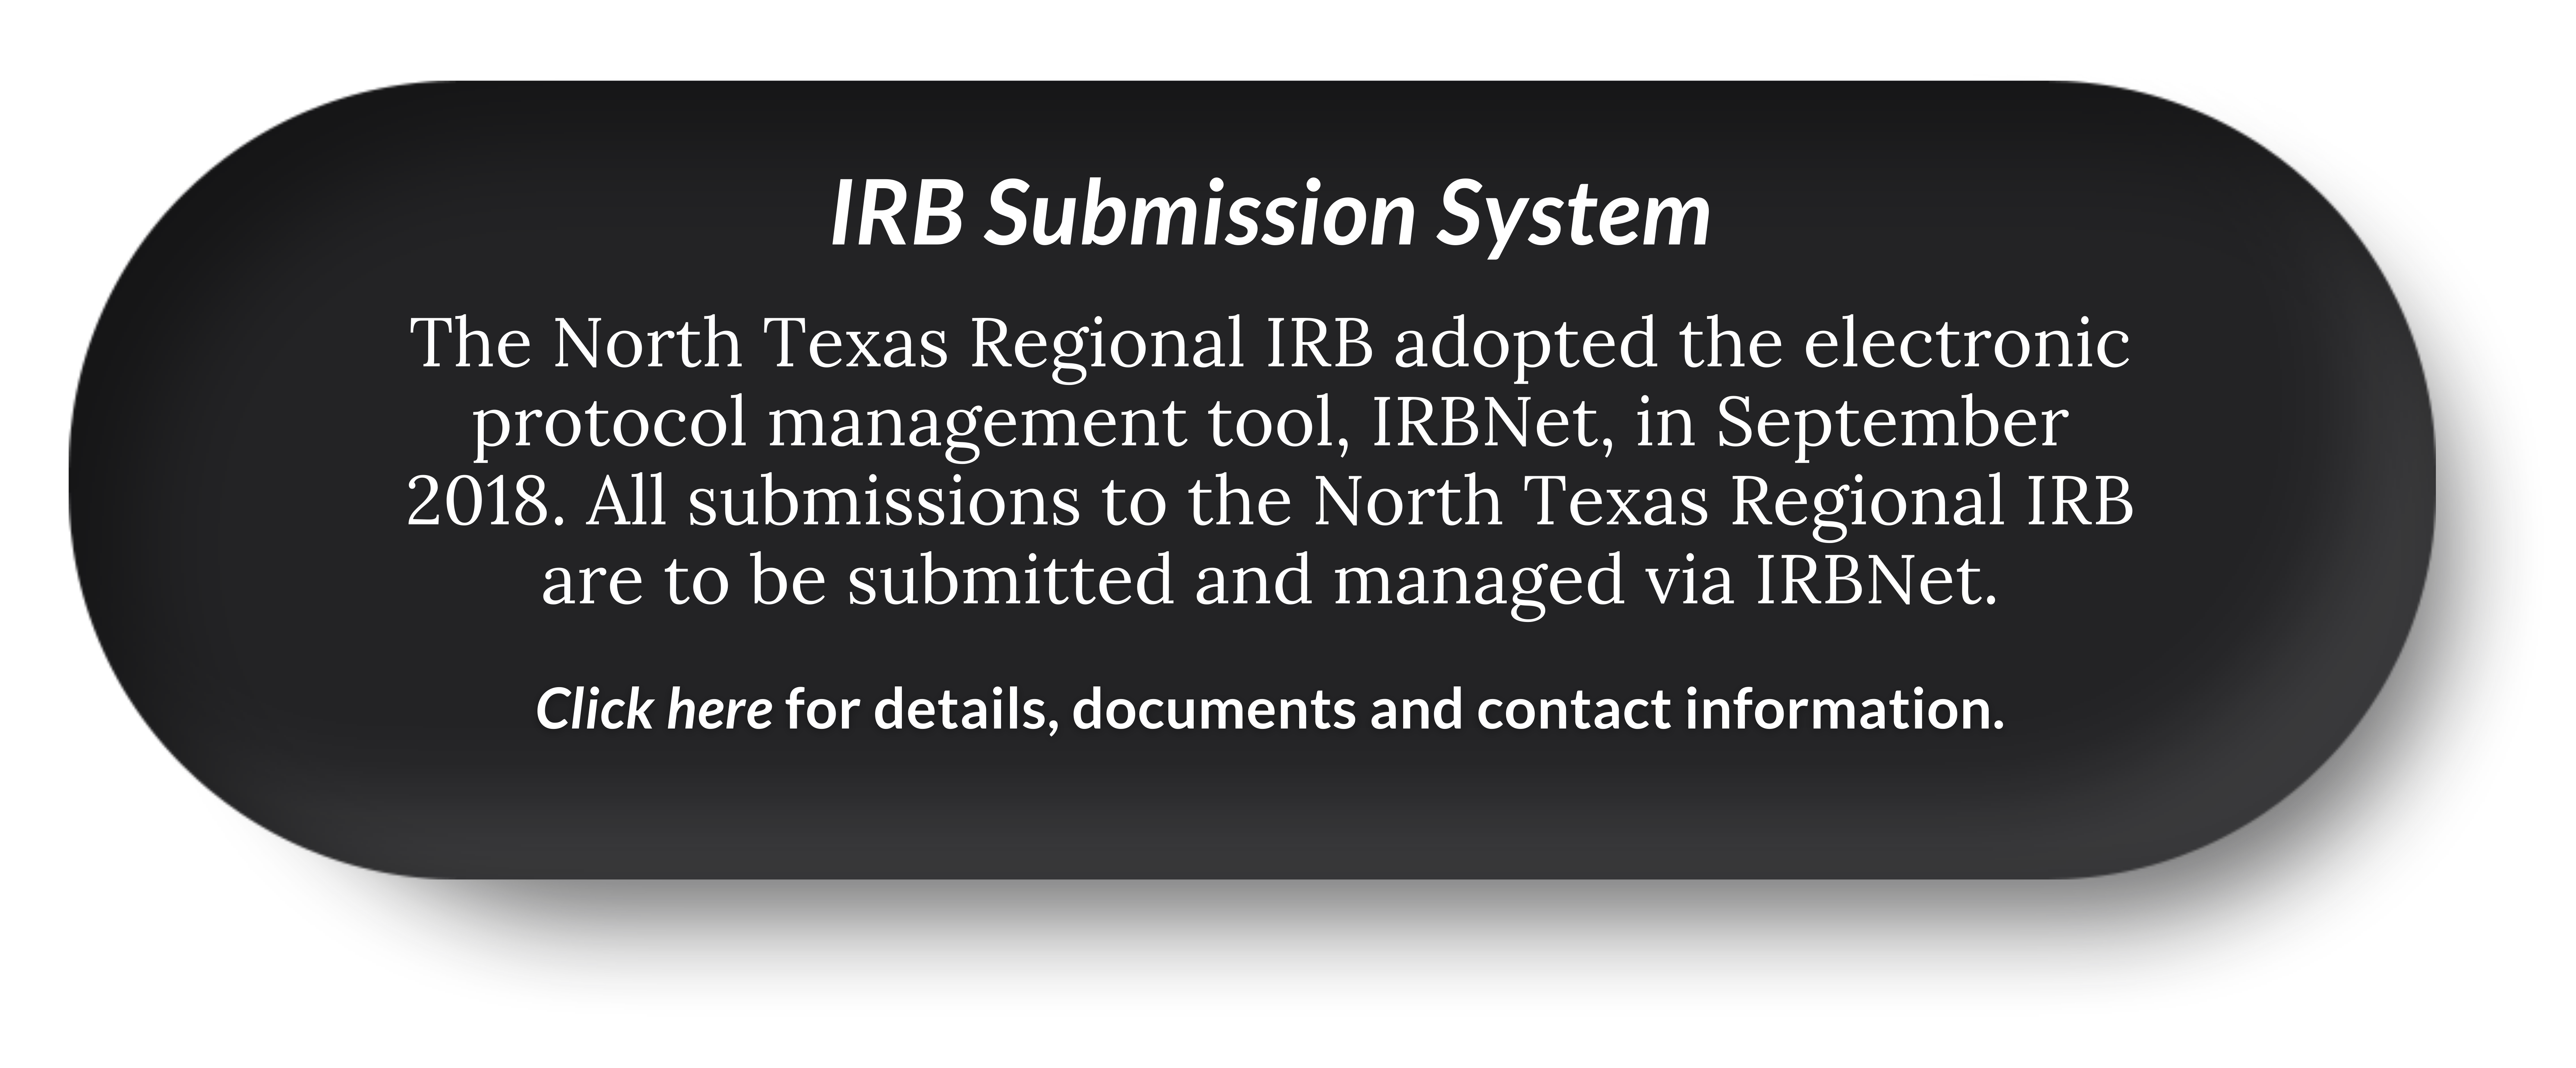 Large black button with white text that reads "IRB Submission System The North Texas Regional adopted the electronic protocol management tool, IRBNet, in September 2018. All submissions to the North Texas Regional IRB are to be submitted and managed via IRBNet. Click here for details, documents and contact information."